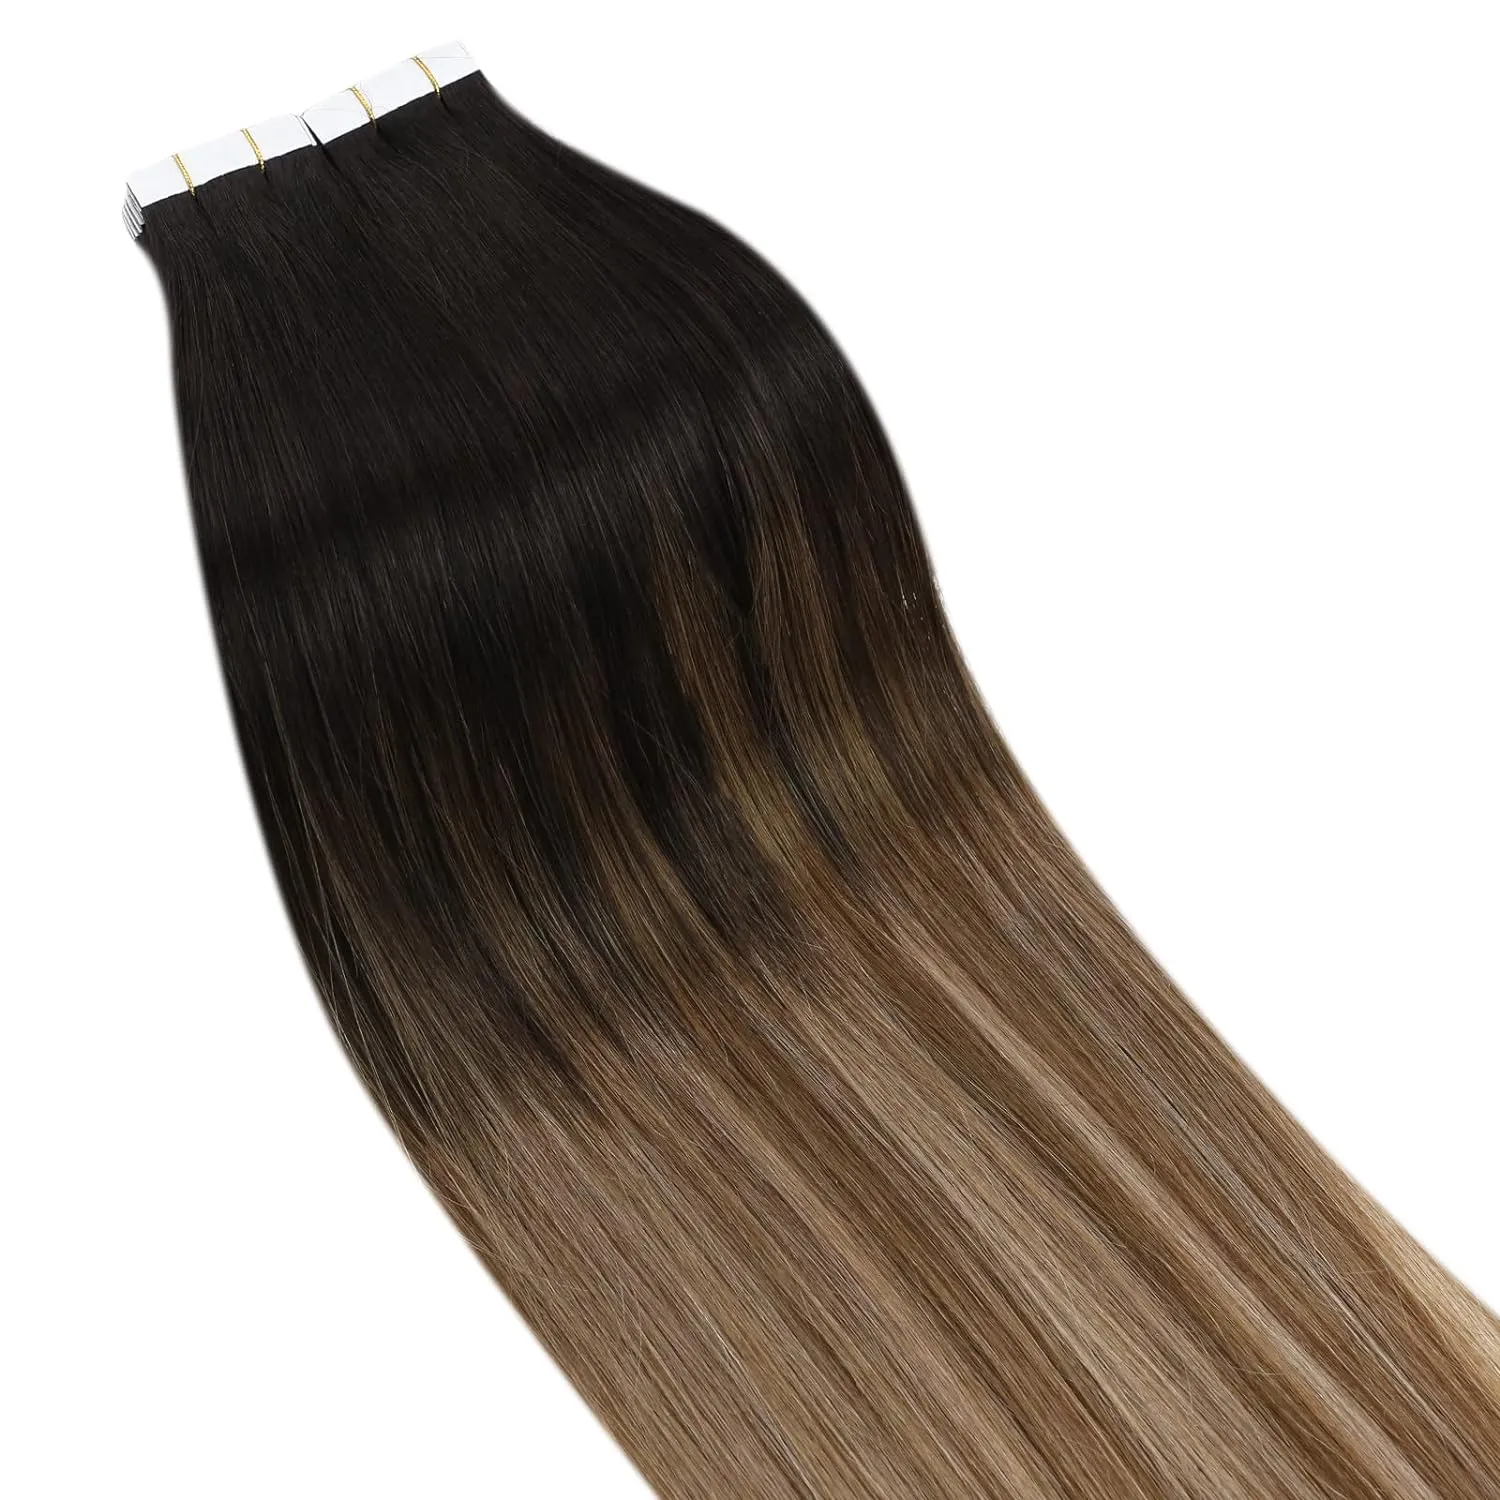 Tape in Hair Extension Balayage Human Hair #2/6/18 Ombre Invisible Skin Weft Tape on ins Extensions 100g/40pcs